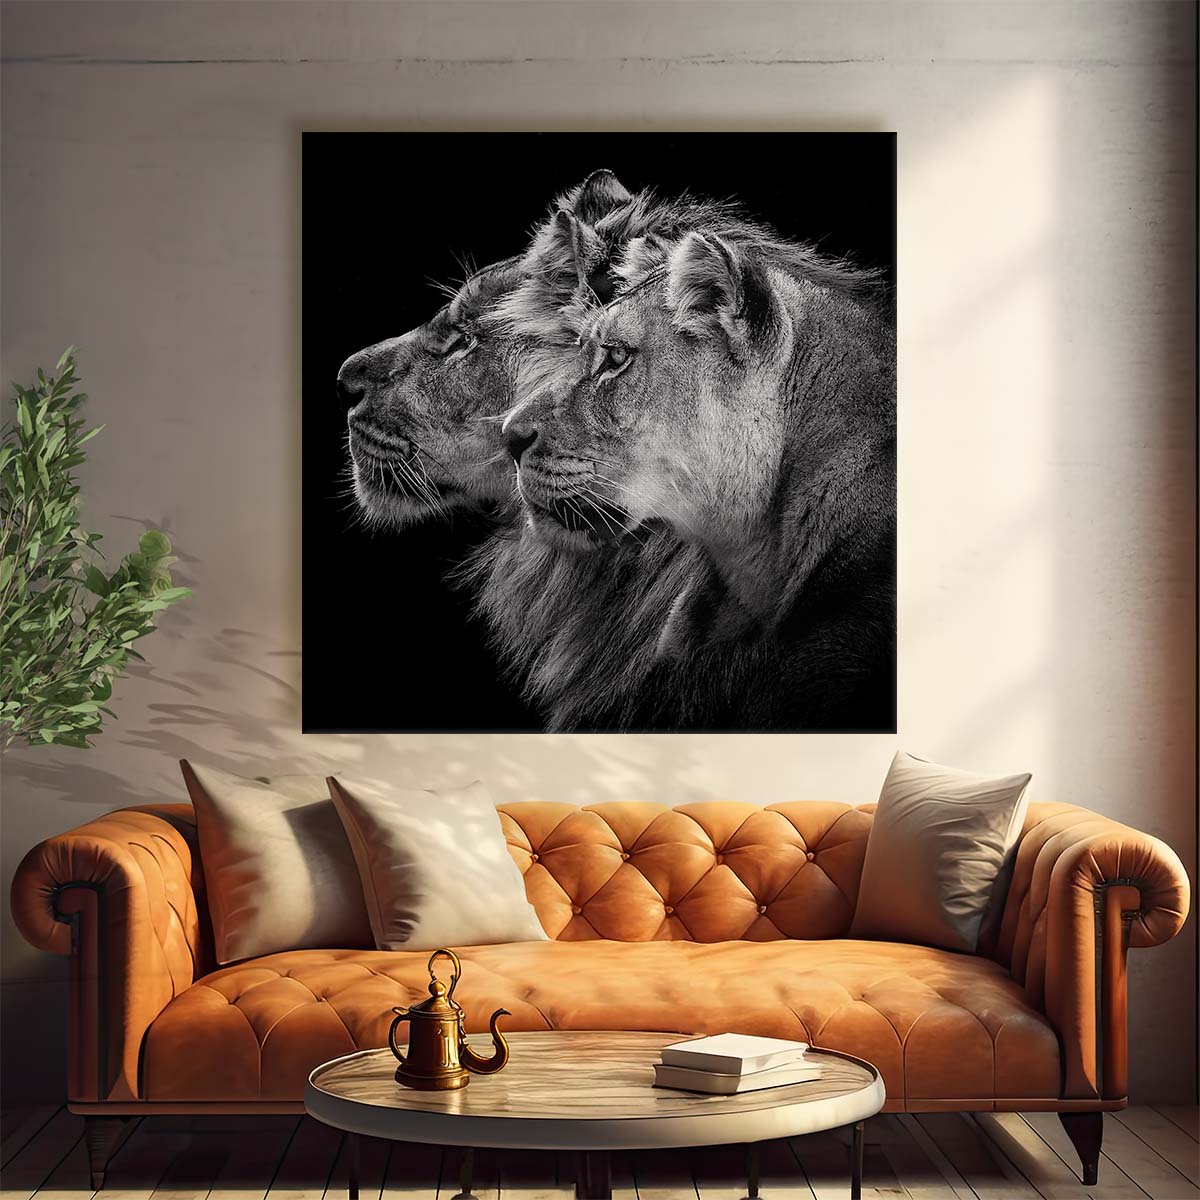 Fierce Love in the Savanna Monochrome Lion Couple Photography Wall Art by Luxuriance Designs. Made in USA.